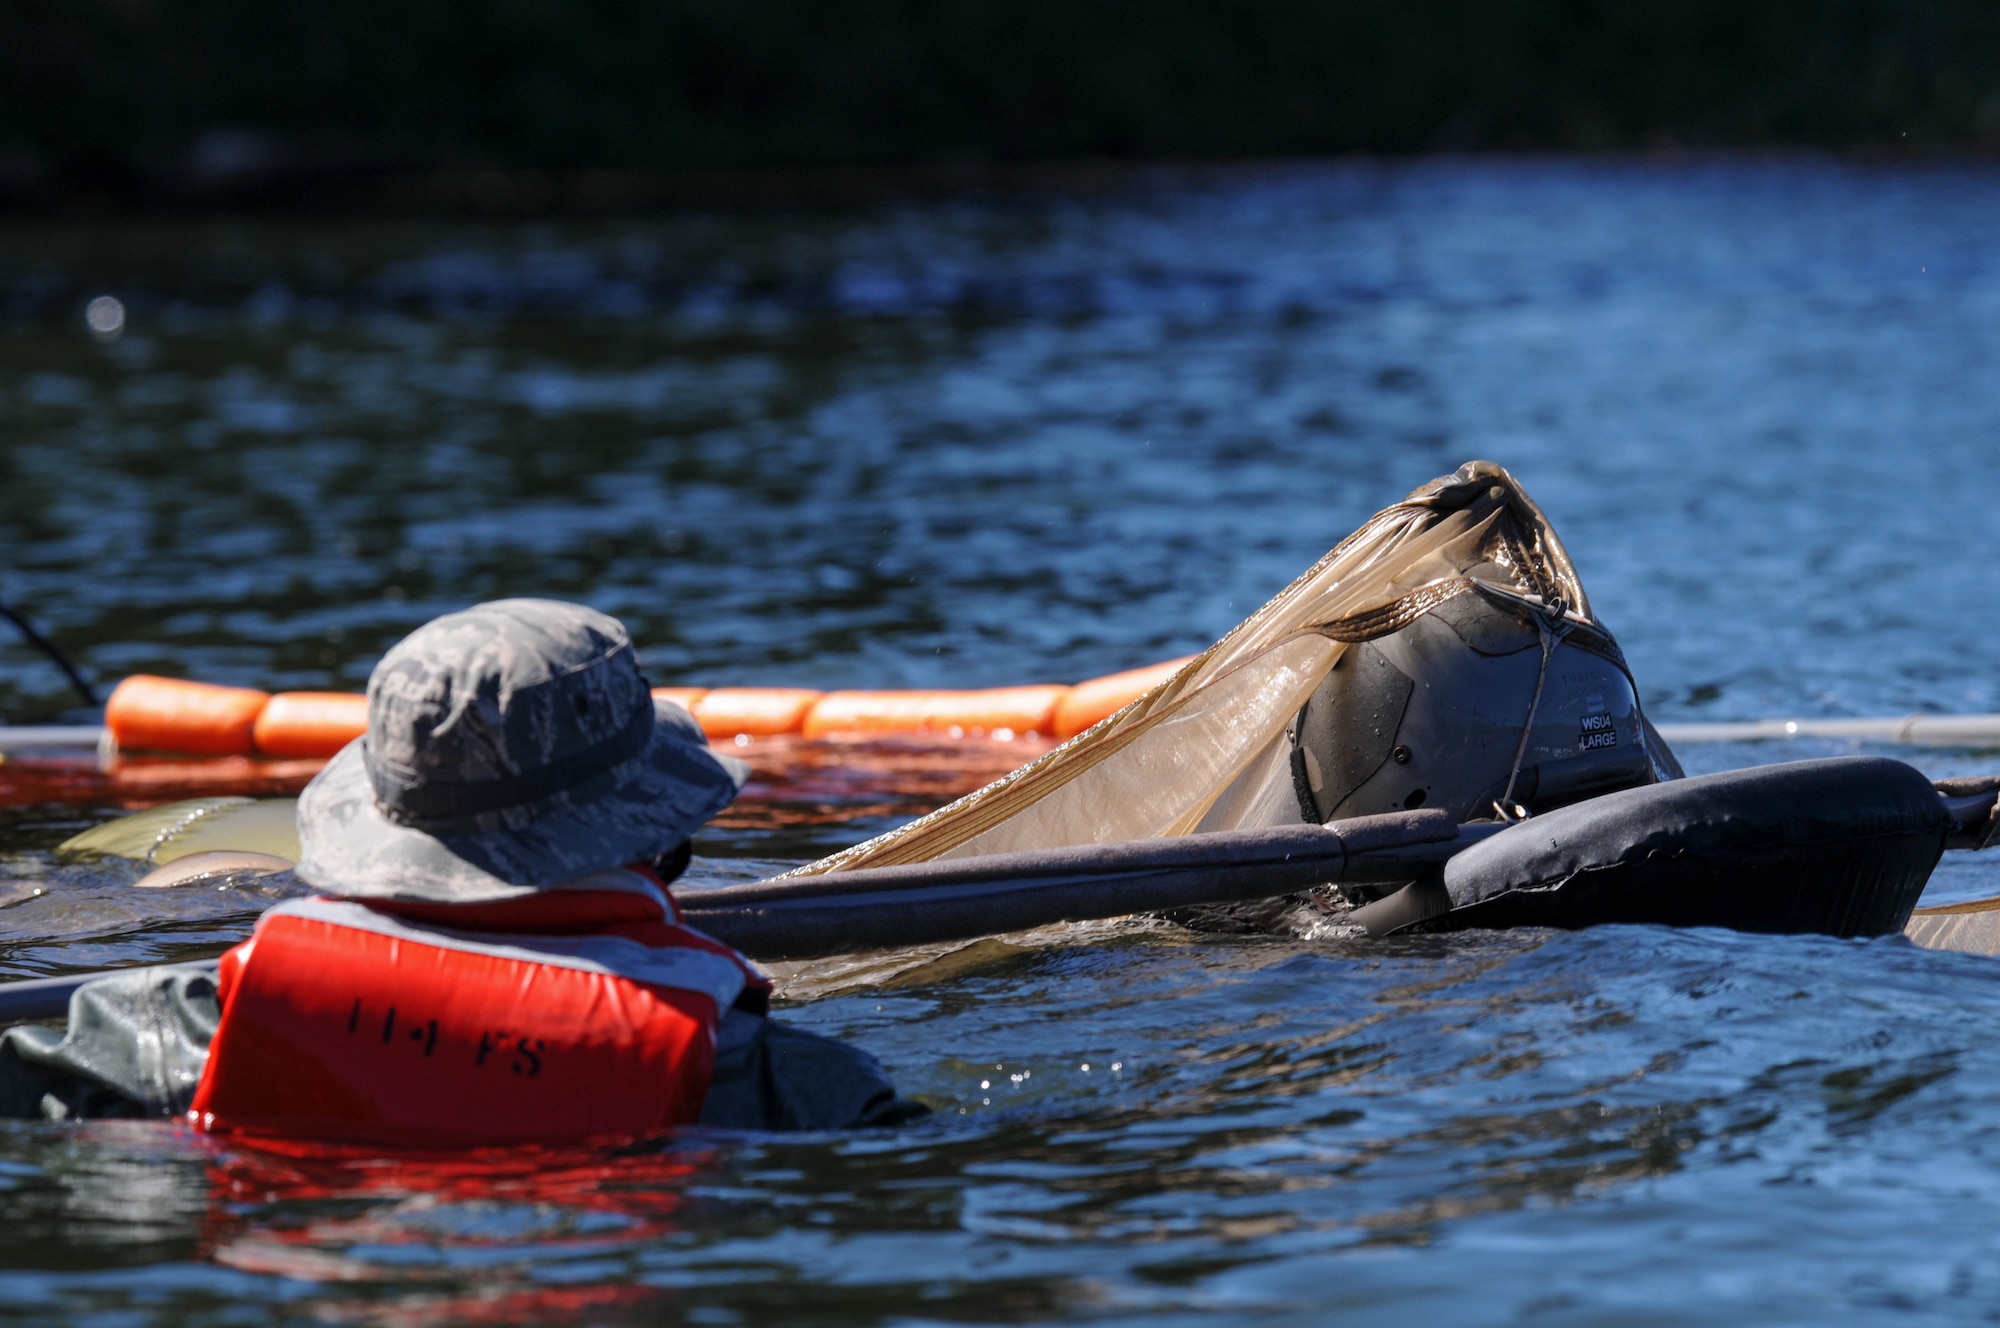 Oregon Air National Guard Staff Sgt. Thomas Howard, 173rd Fighter Wing Aircrew Flight Equipment, left, directs a pilot through a water-logged parachute during water survival training at Lake of the Woods near Klamath Falls, Ore., July 22, 2016. AFE members helped Kingsley’s F-15 pilots, providing water survival training in the event of an emergency ejection. (U.S. Air National Guard photo by Staff Sgt. Penny Snoozy)